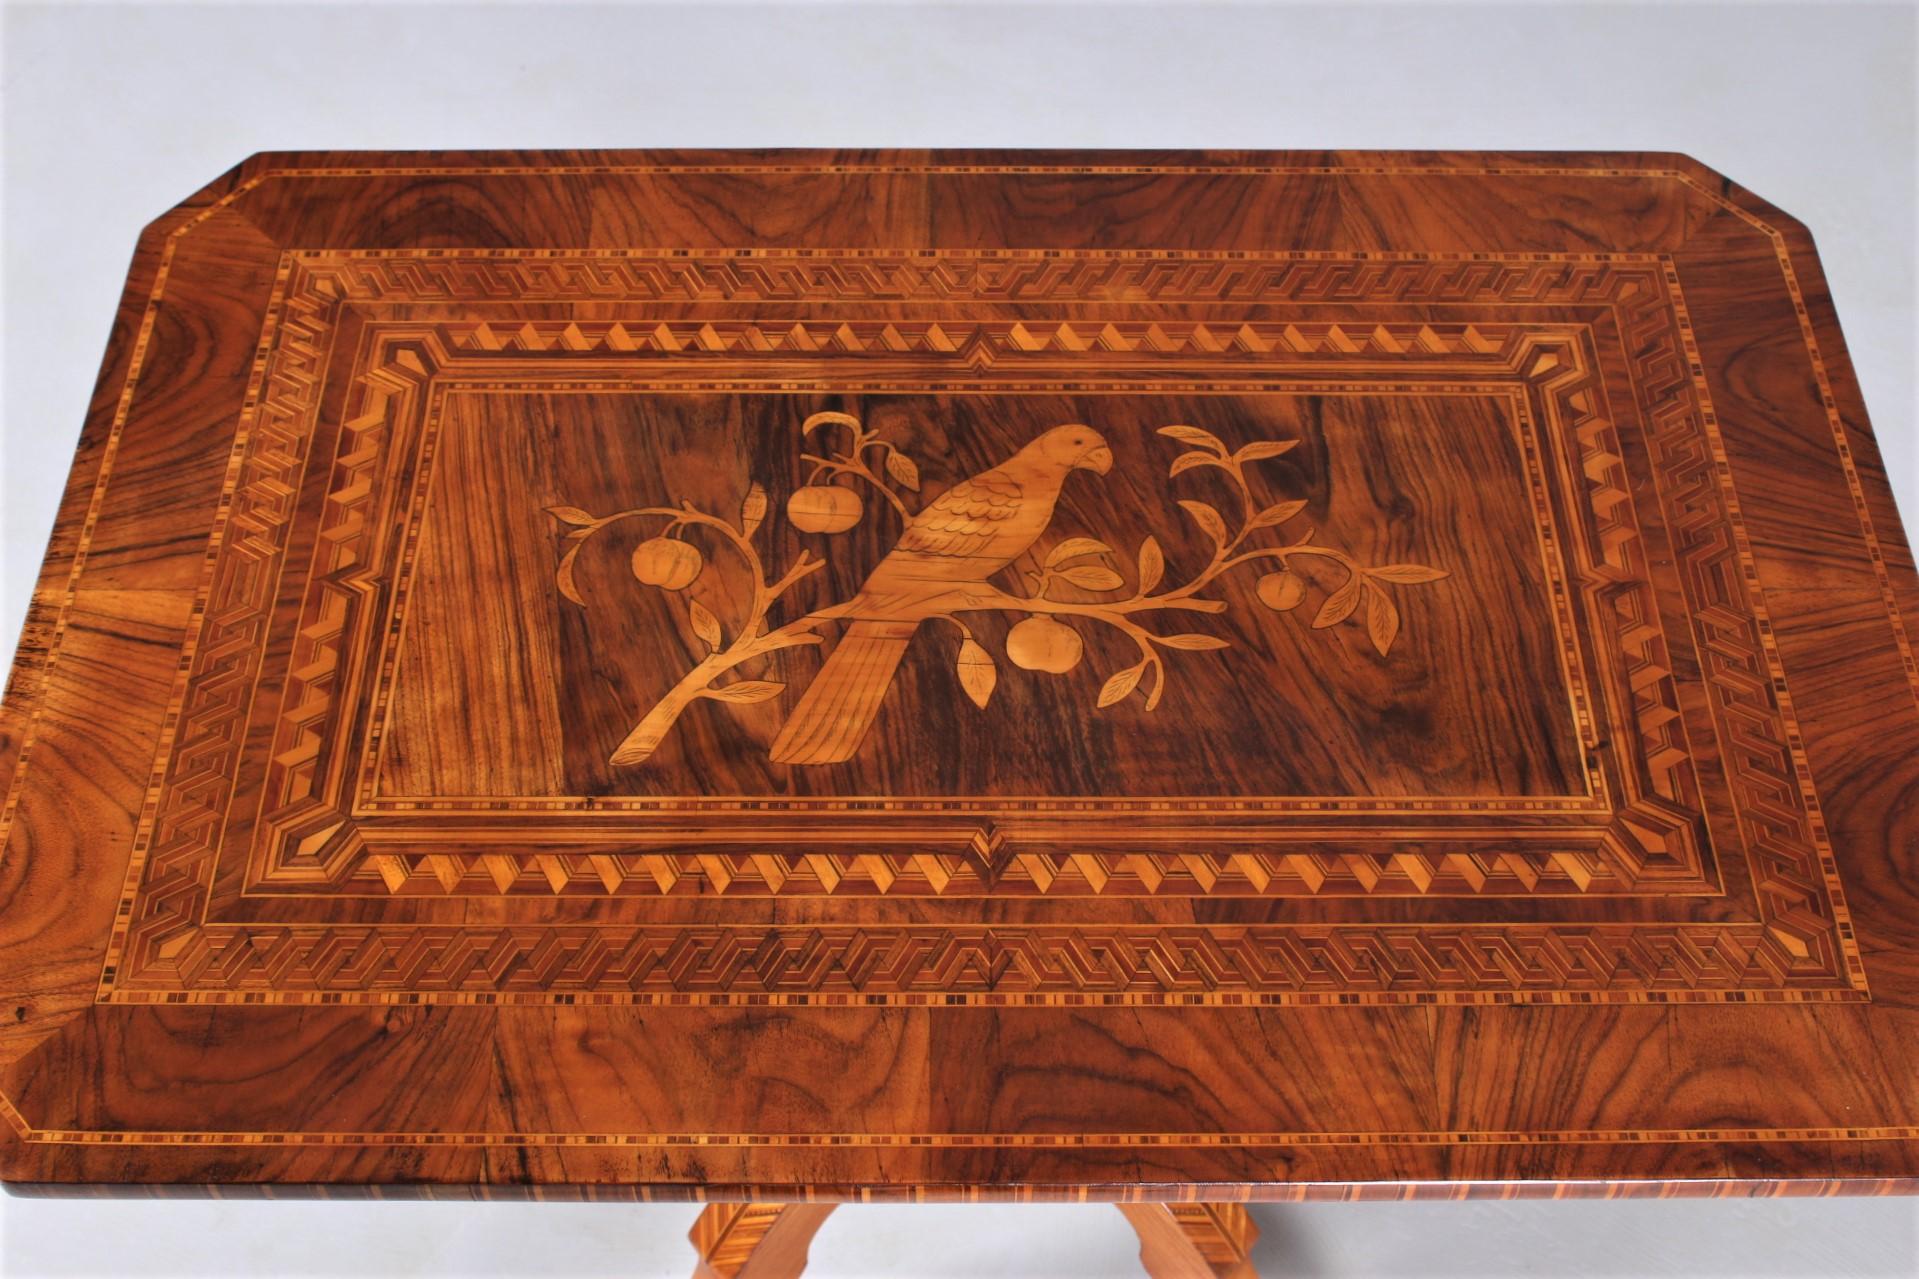 Antique table from the second half of the 19th century. Walnut veneered. Geometric and figural marquetry on the top and inlay work on the central foot.
Italian work from the area around Sorrento.

Restored and polished with shellac.
Dimensions: